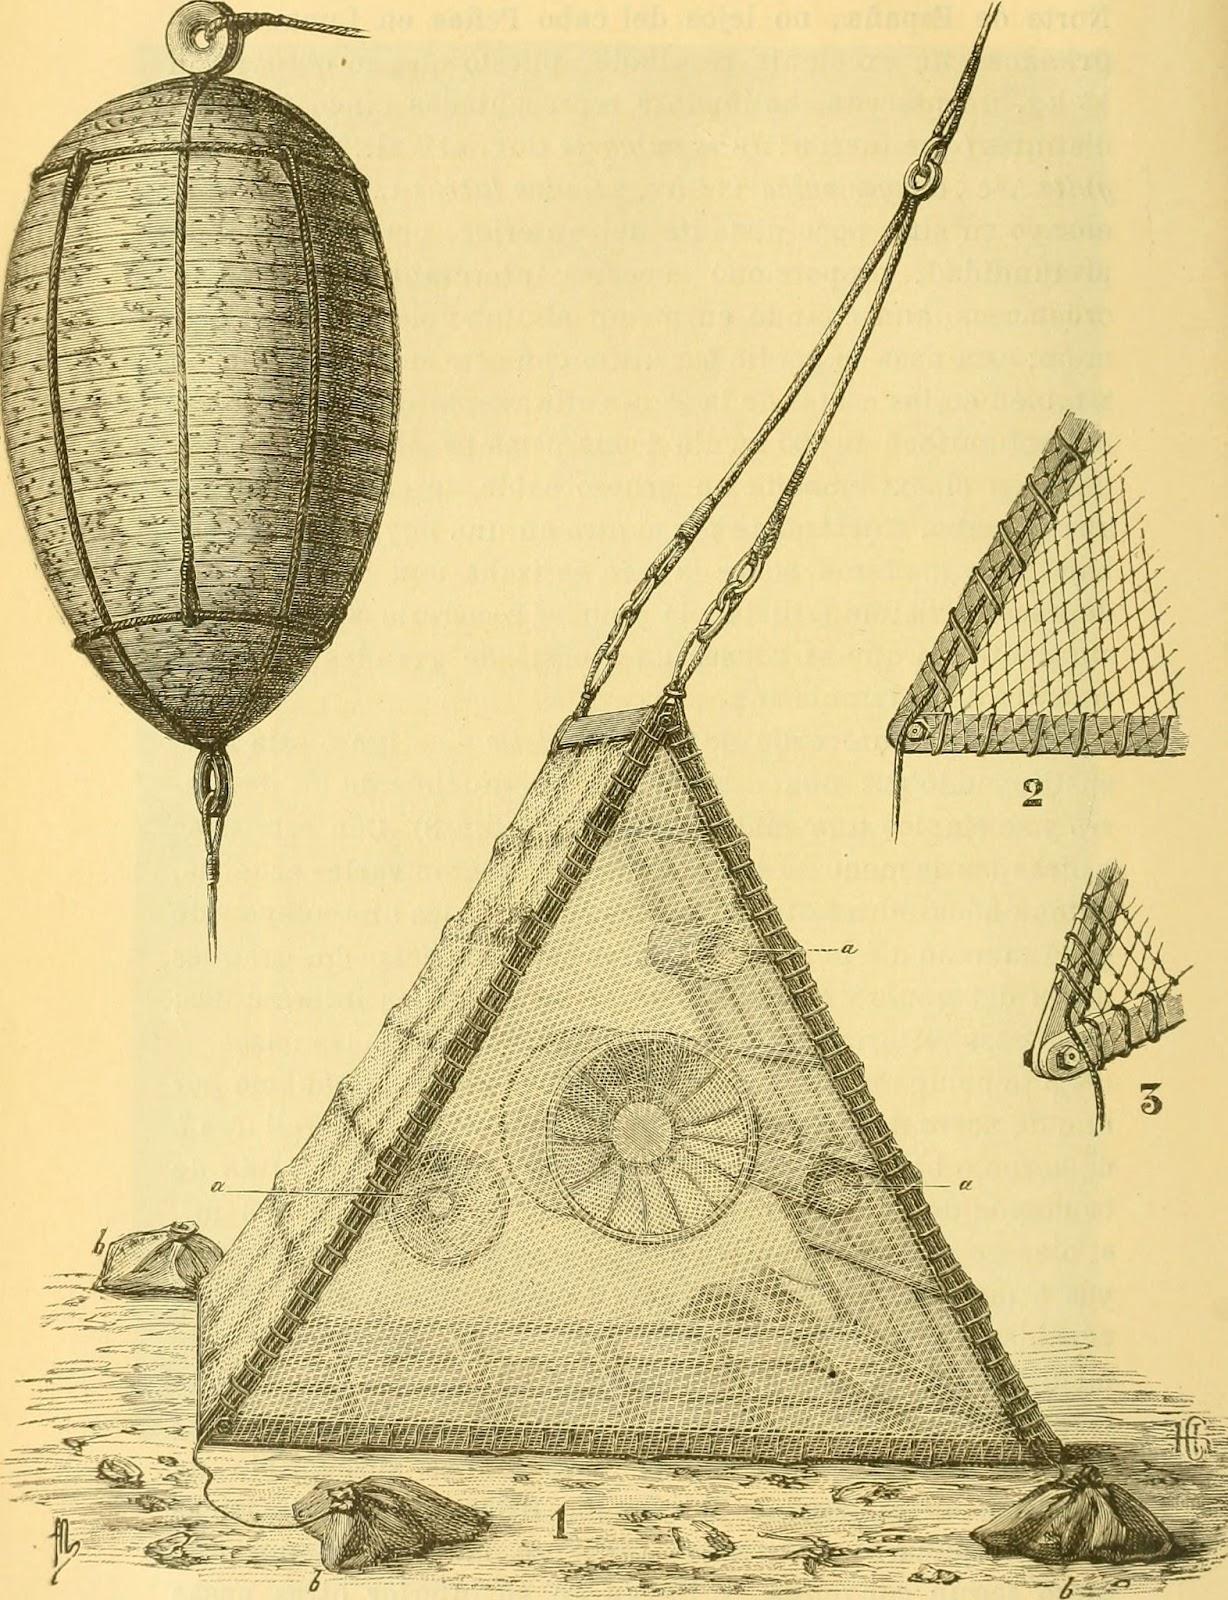 Polyhedral trap, in Annals of the Spanish Society of Natural History (1891)